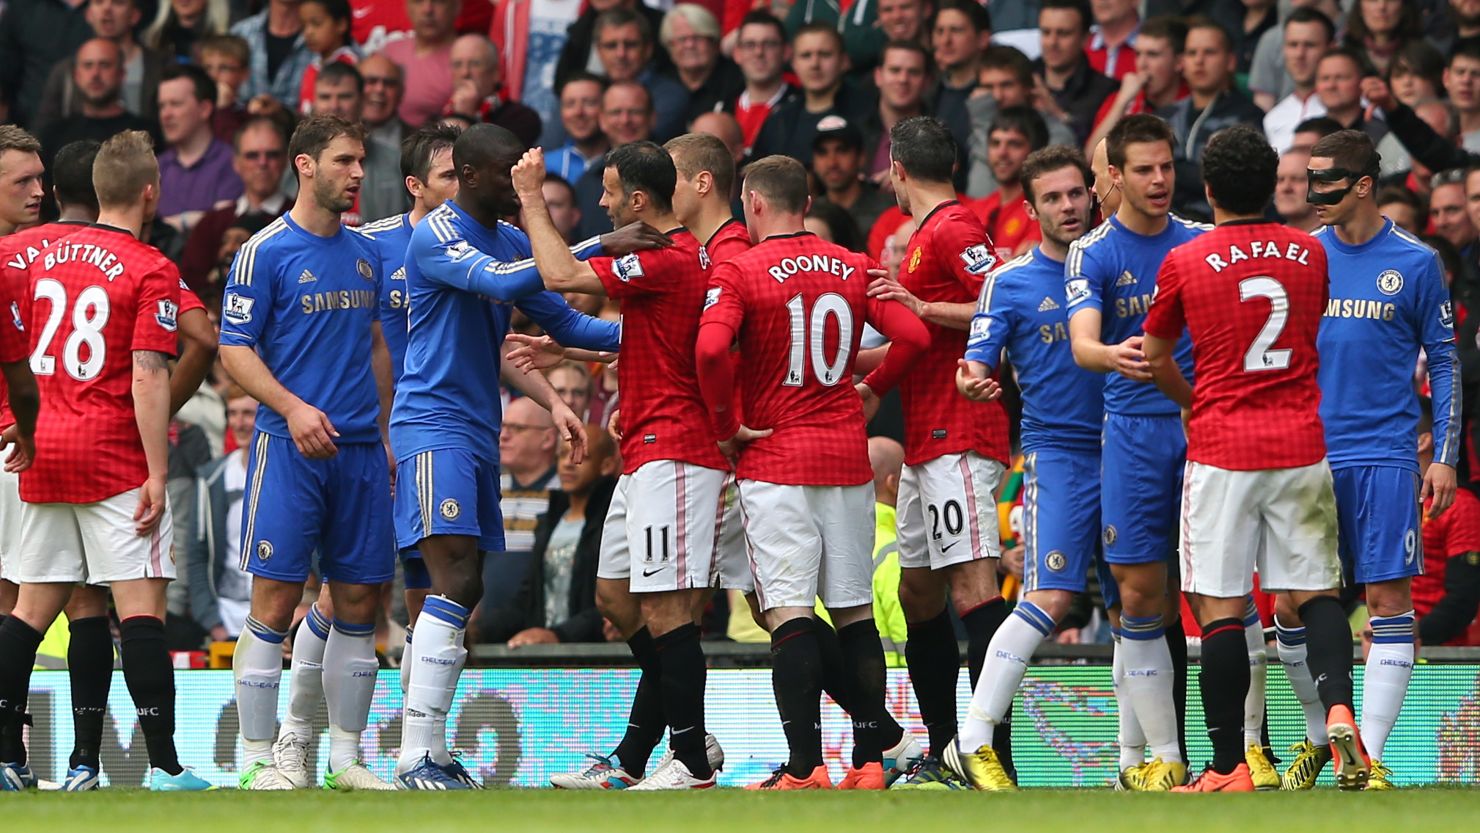 Rafael Da Silva's clash with David Luiz caused a mass confrontation between the Manchester United and Chelsea players.